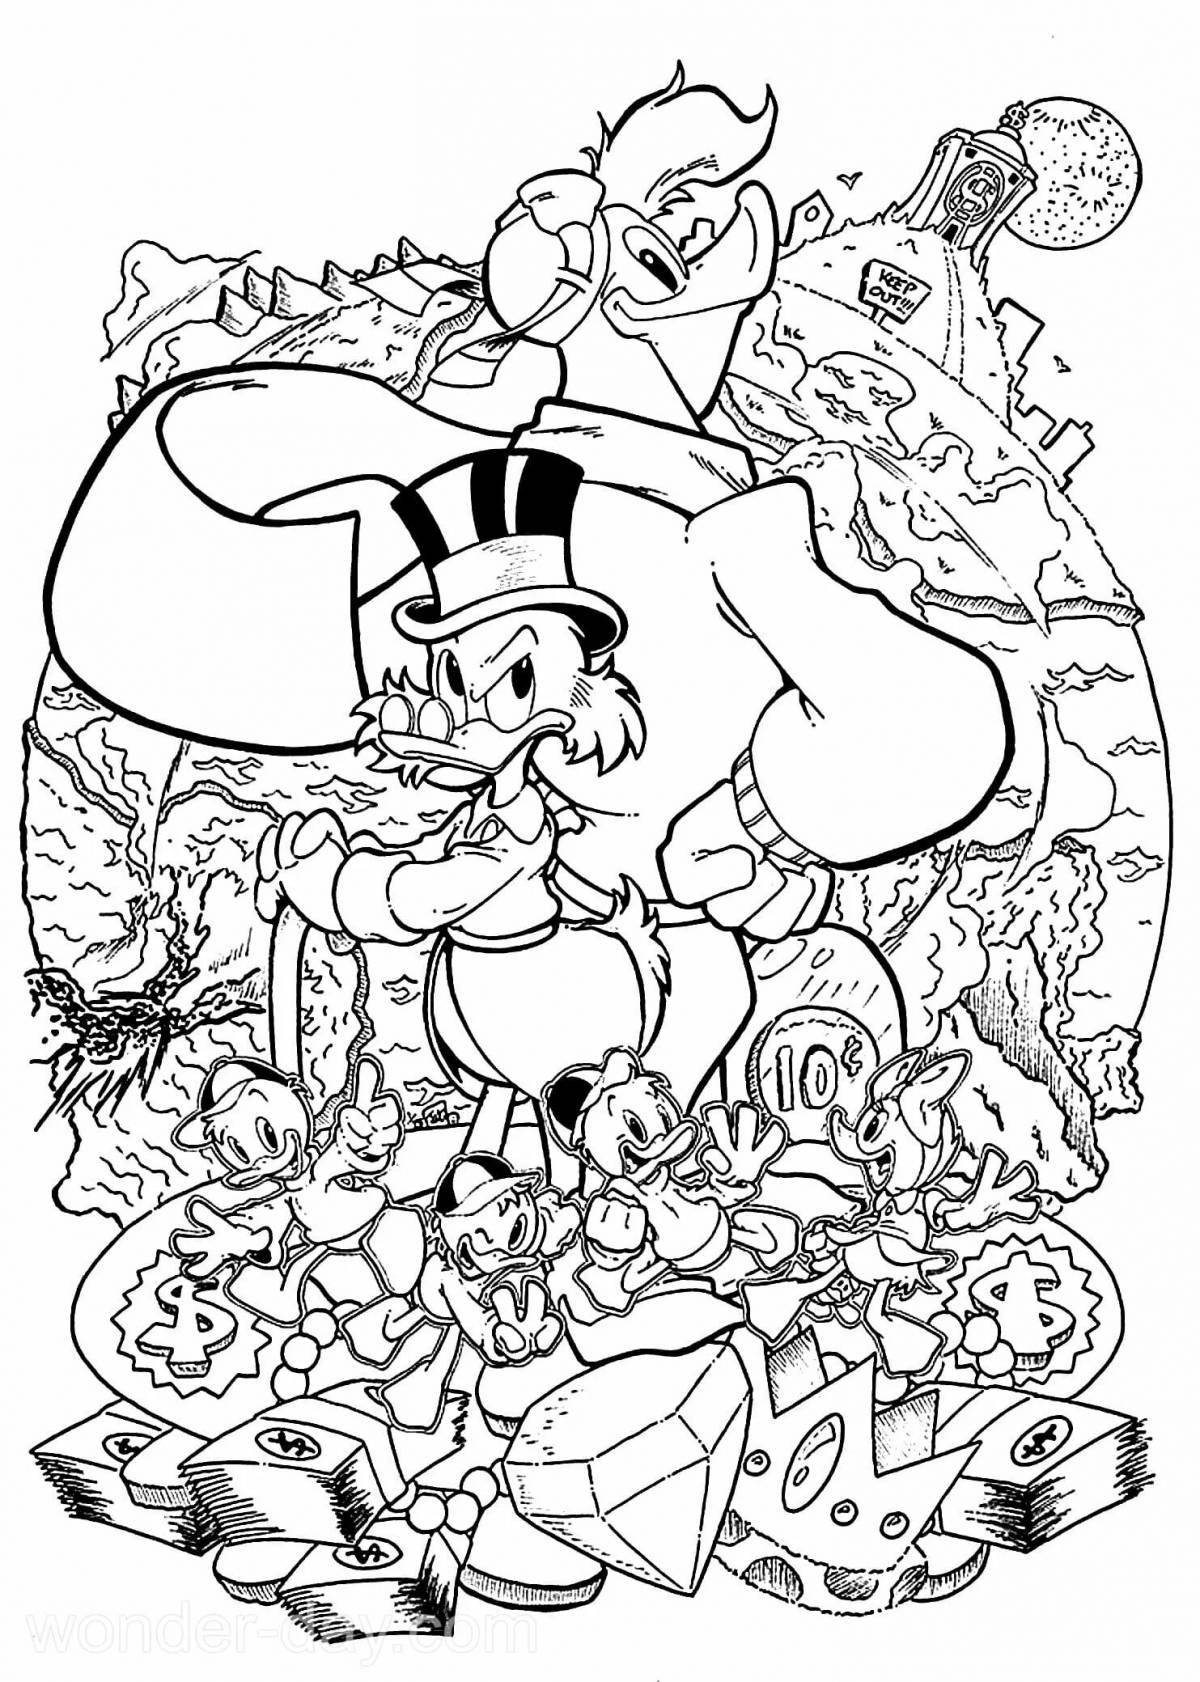 DuckTales 2017 coloring pages